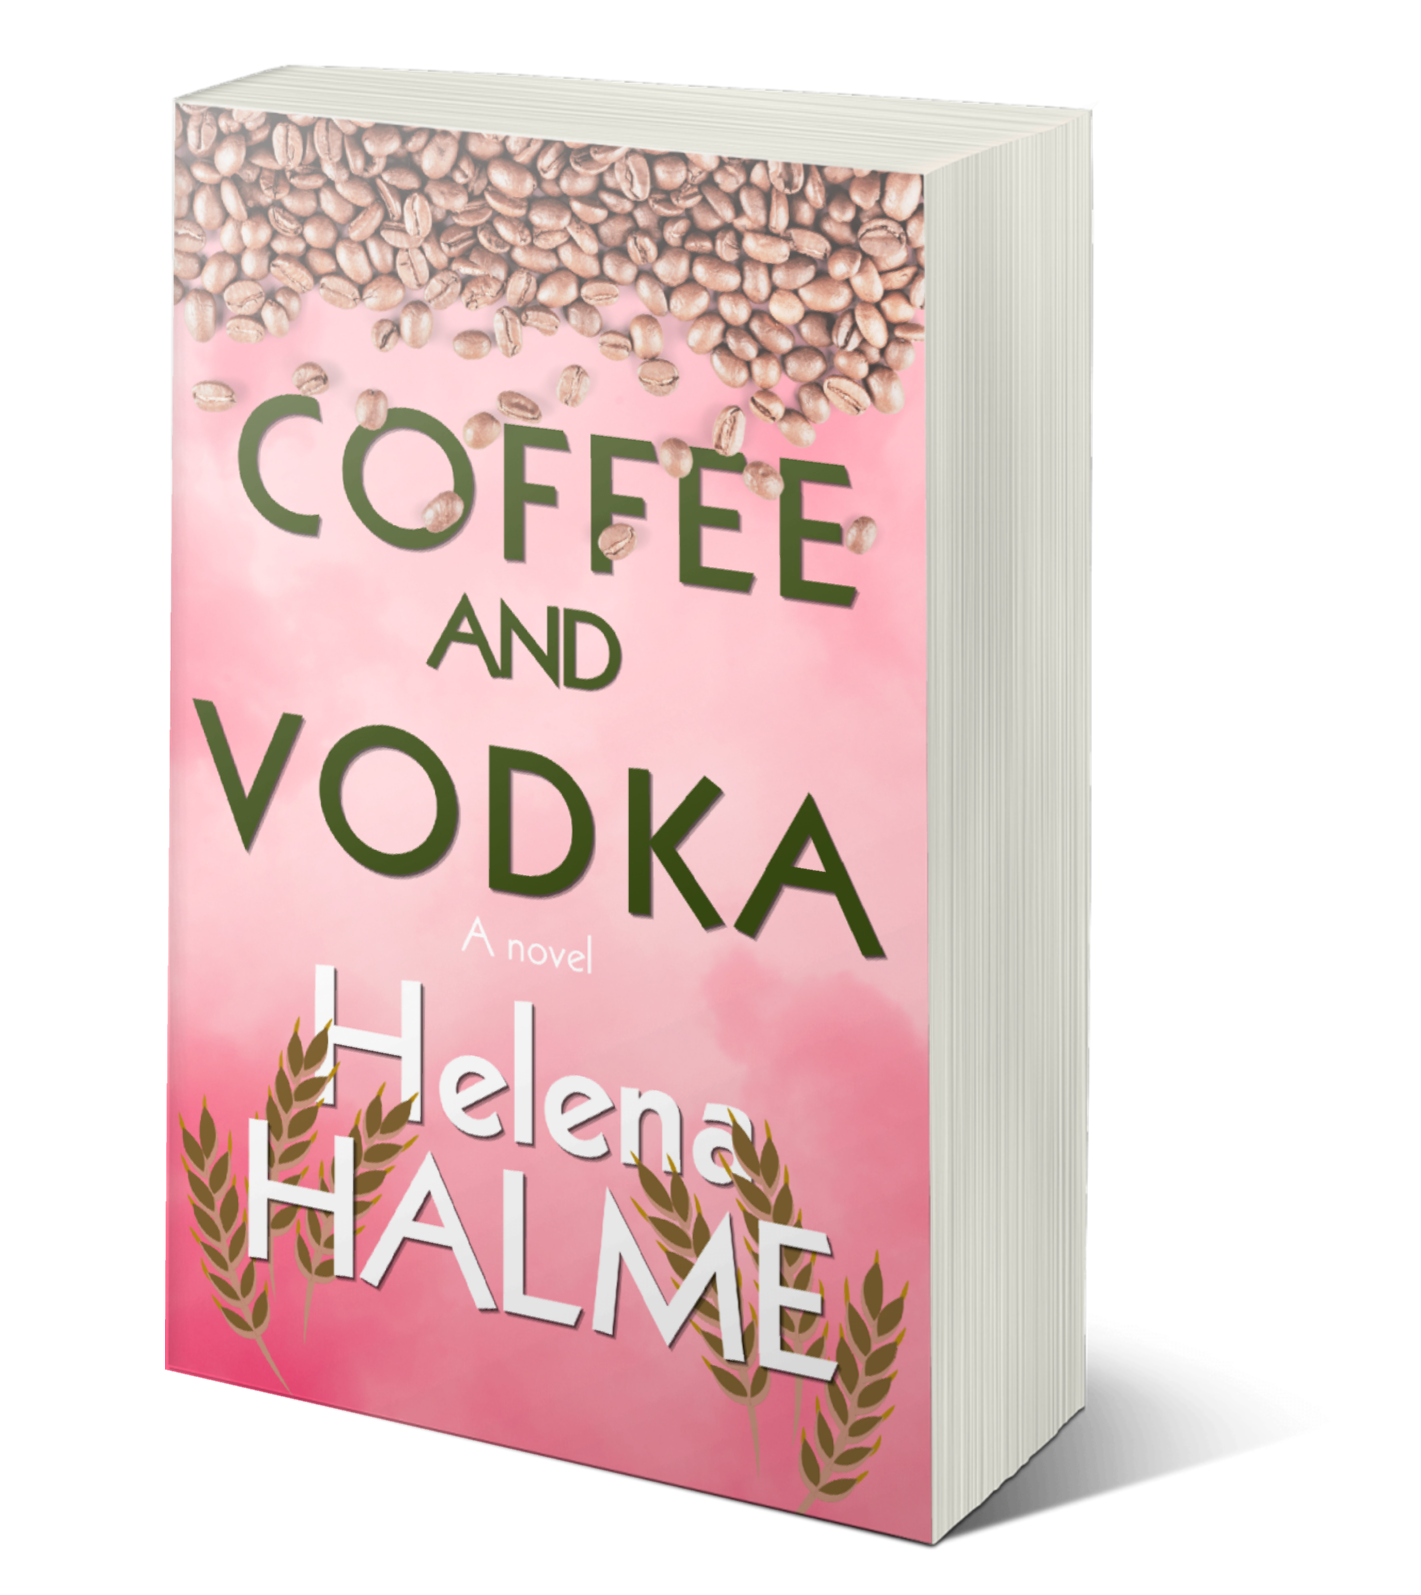 Coffee and Vodka – save 50% when you buy any fiction paperback book in store!